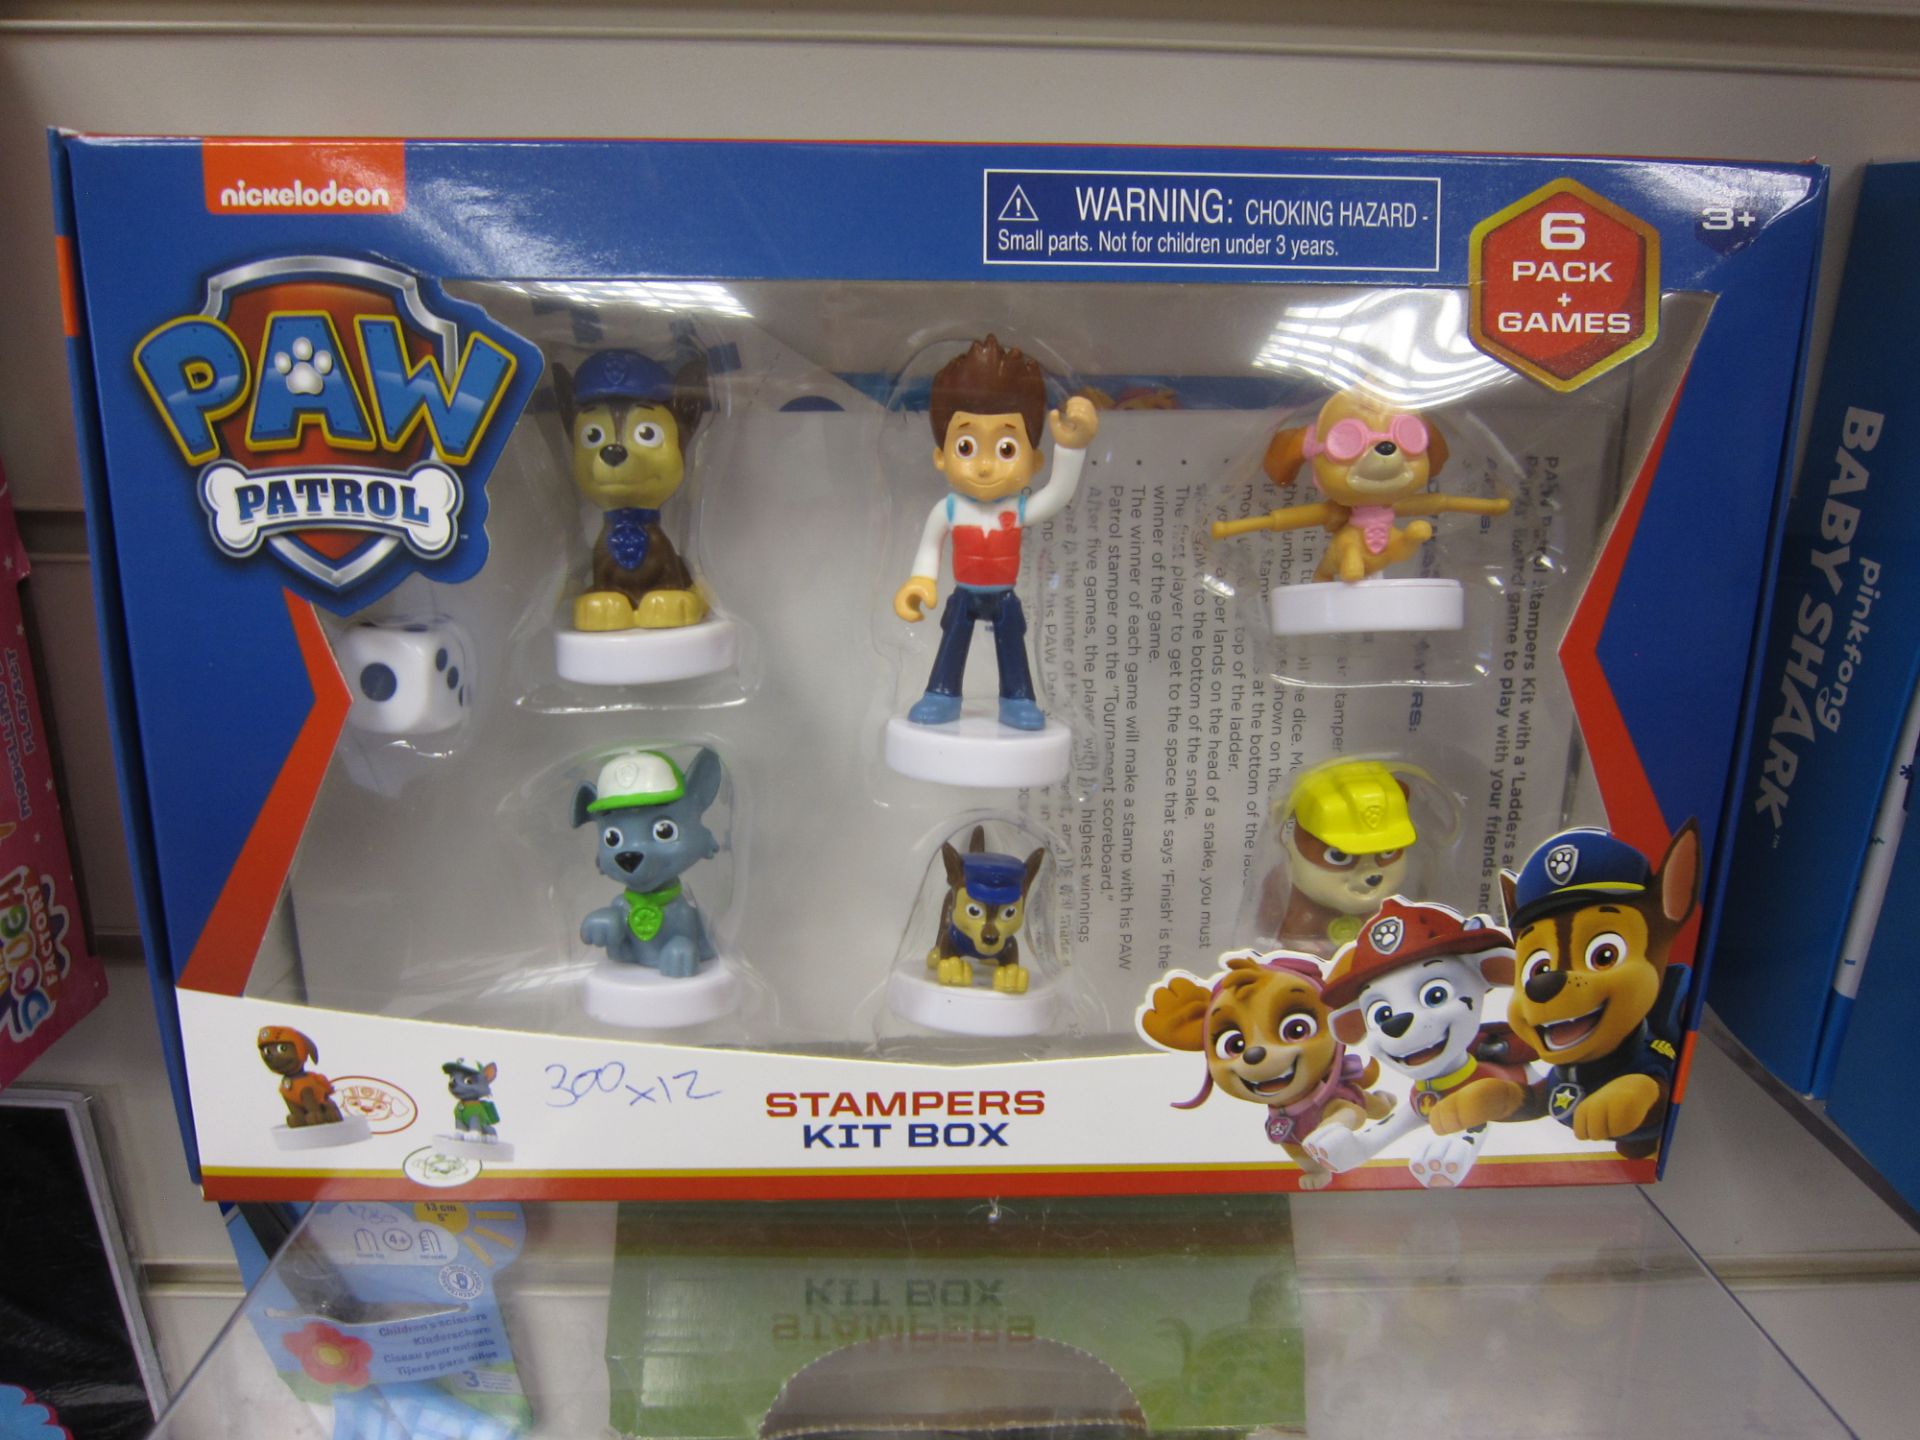 100Pcs Paw Patrol Brand New Sealed 6 Pack Stamper Set With Games In Side Such As Snakes & Ladder...